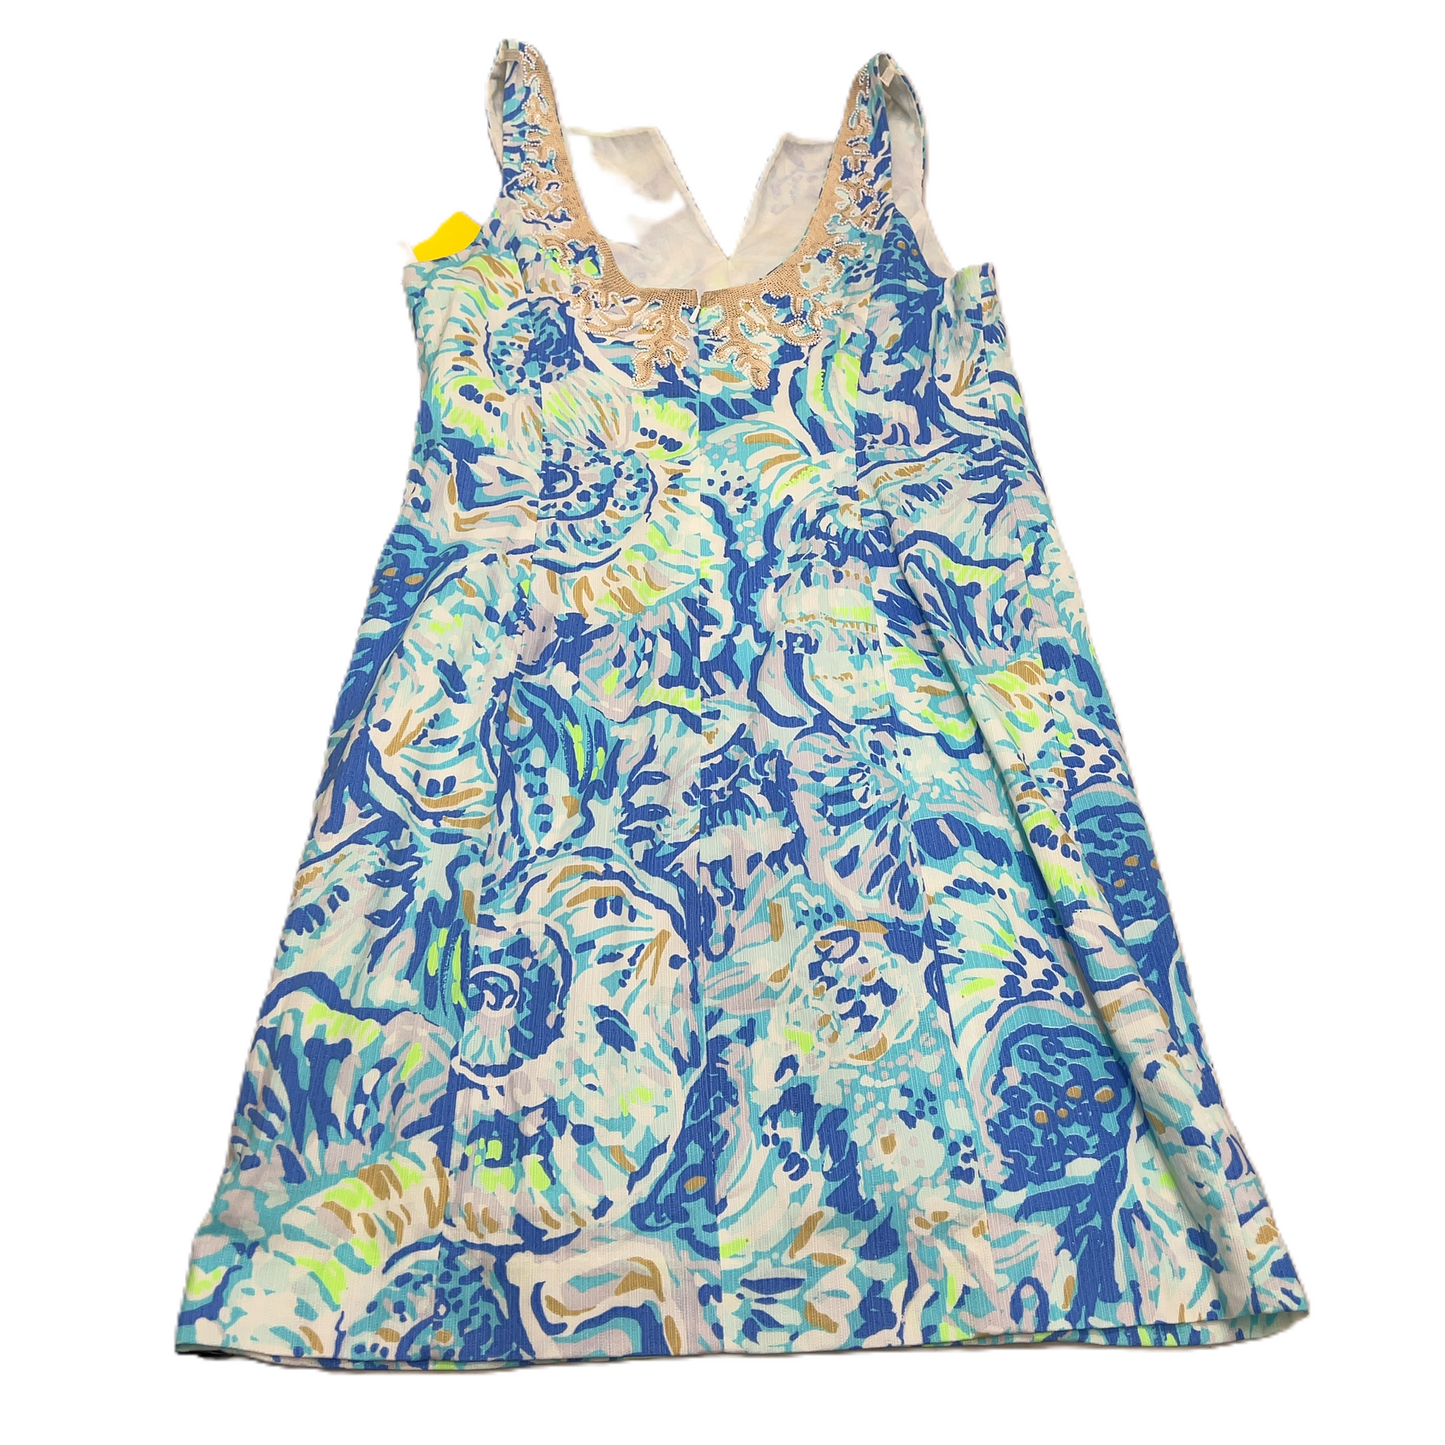 Blue & Cream  Dress Designer By Lilly Pulitzer  Size: S